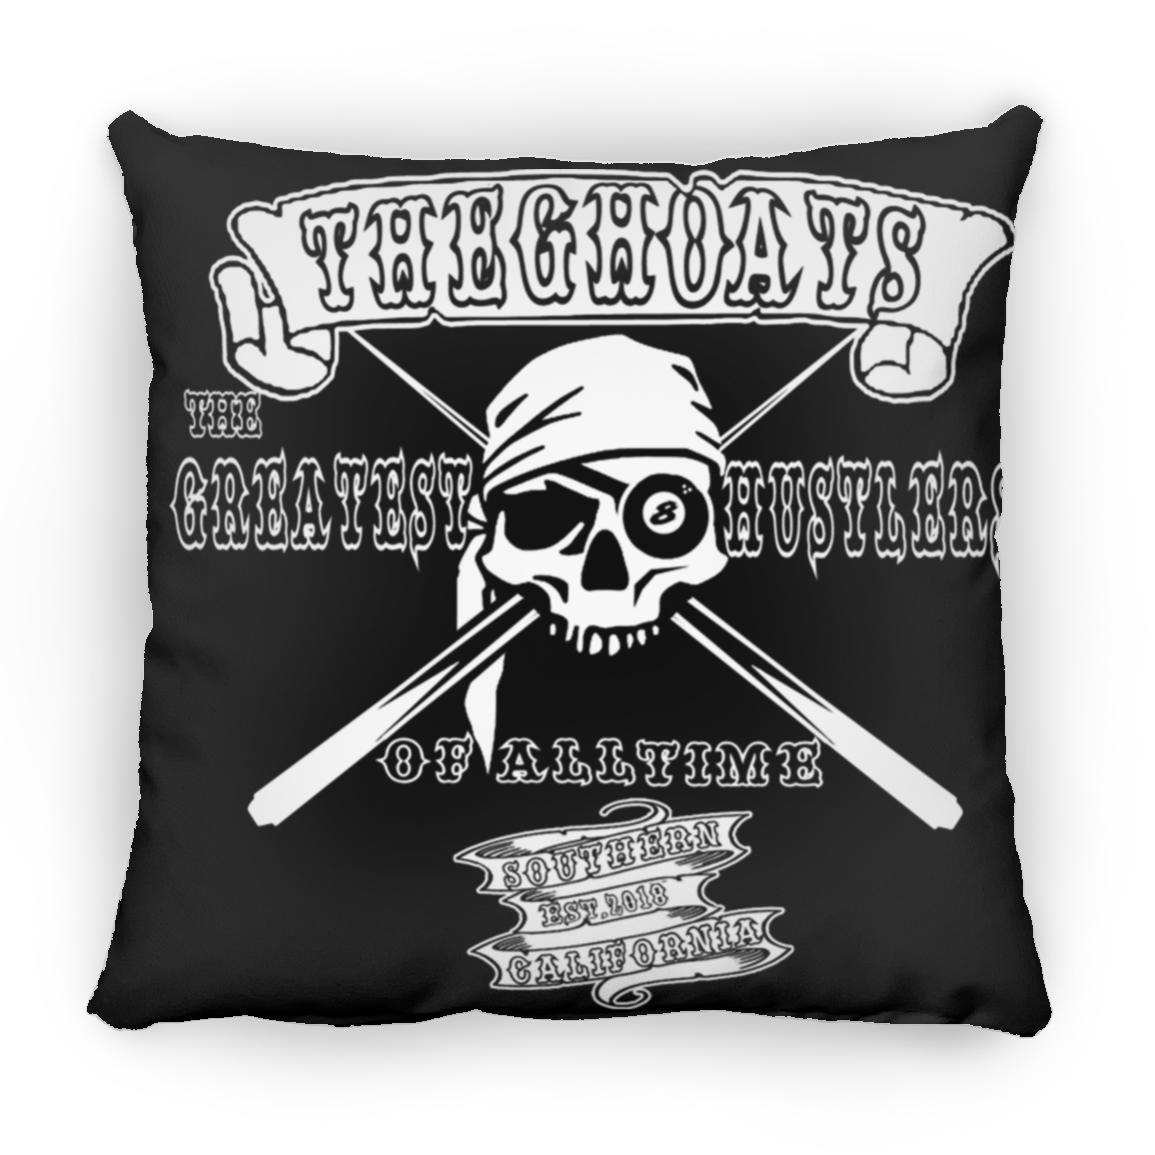 The GHOATS Custom Design. #4 Motorcycle Club Style. Ver 2/2. Large Square Pillow